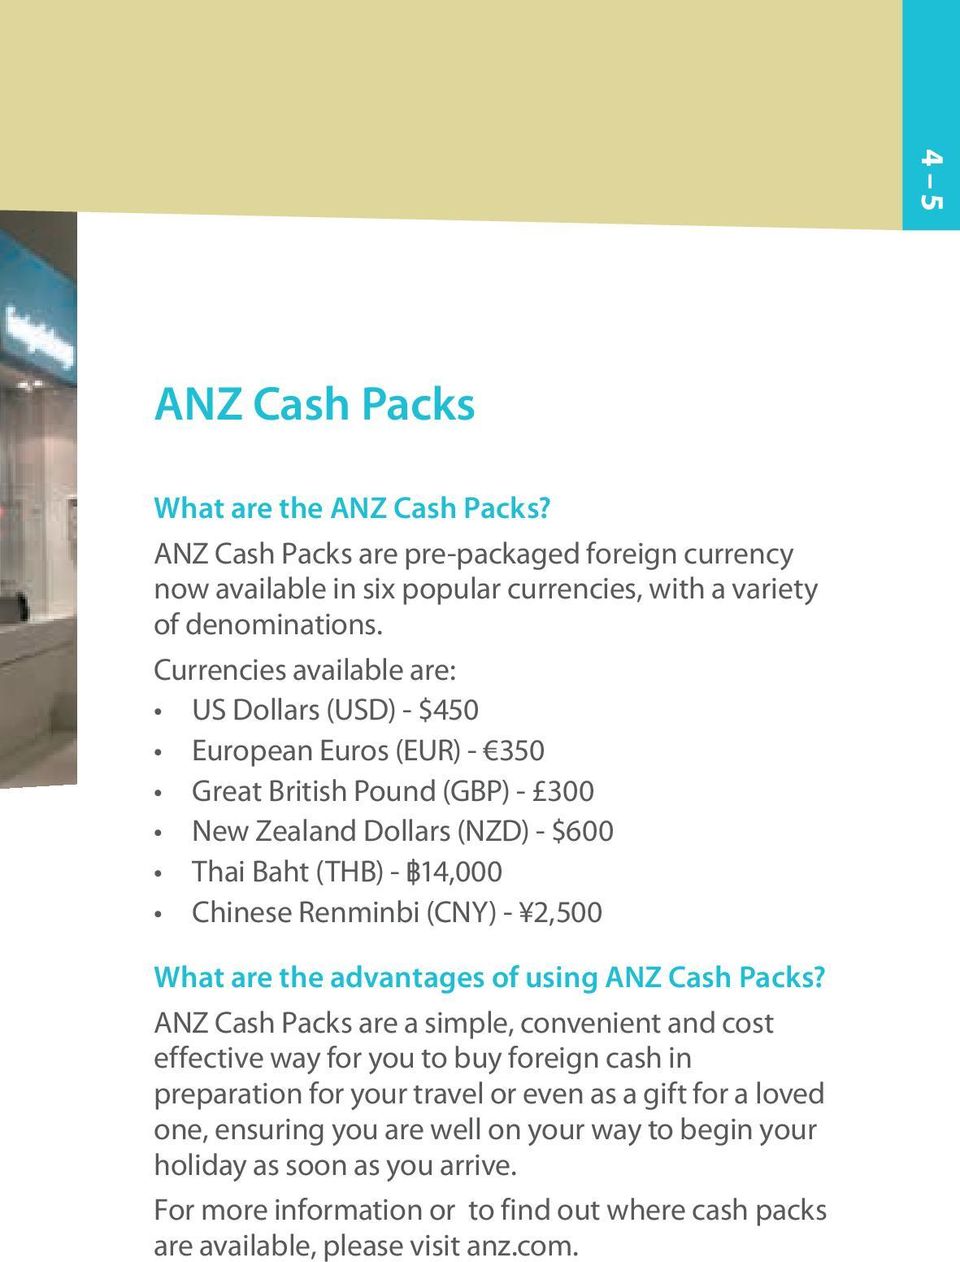 (CNY) - 2,500 What are the advantages of using ANZ Cash Packs?